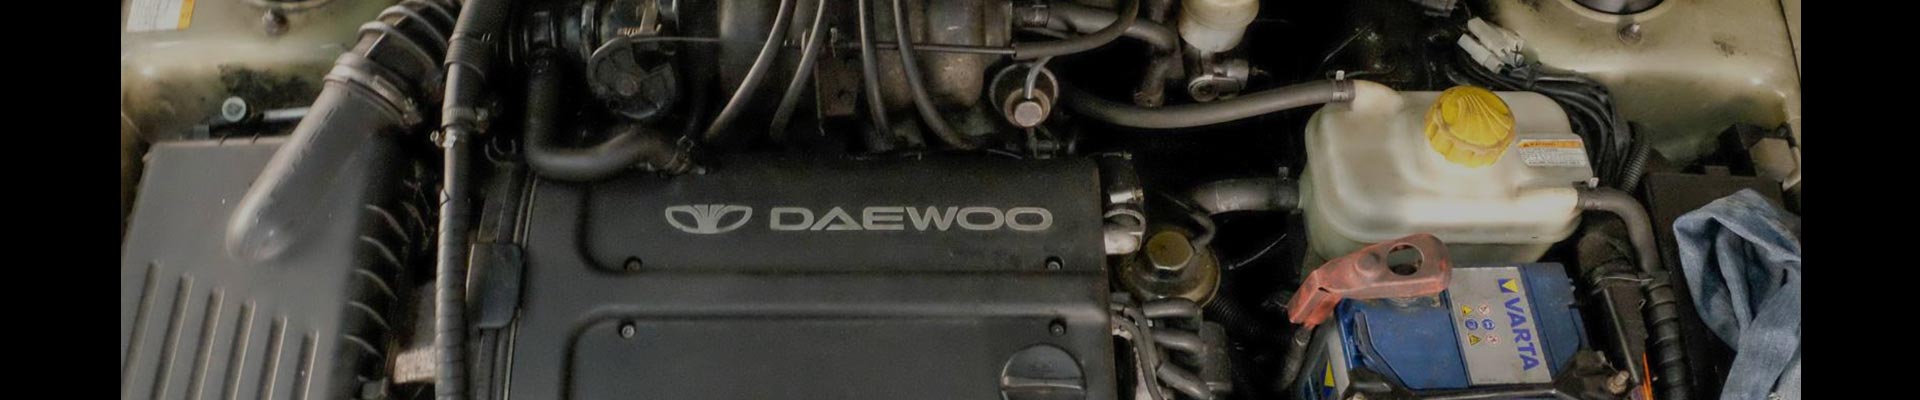 Shop Replacement 1999 Daewoo Lanos Parts with Discounted Price on the Net